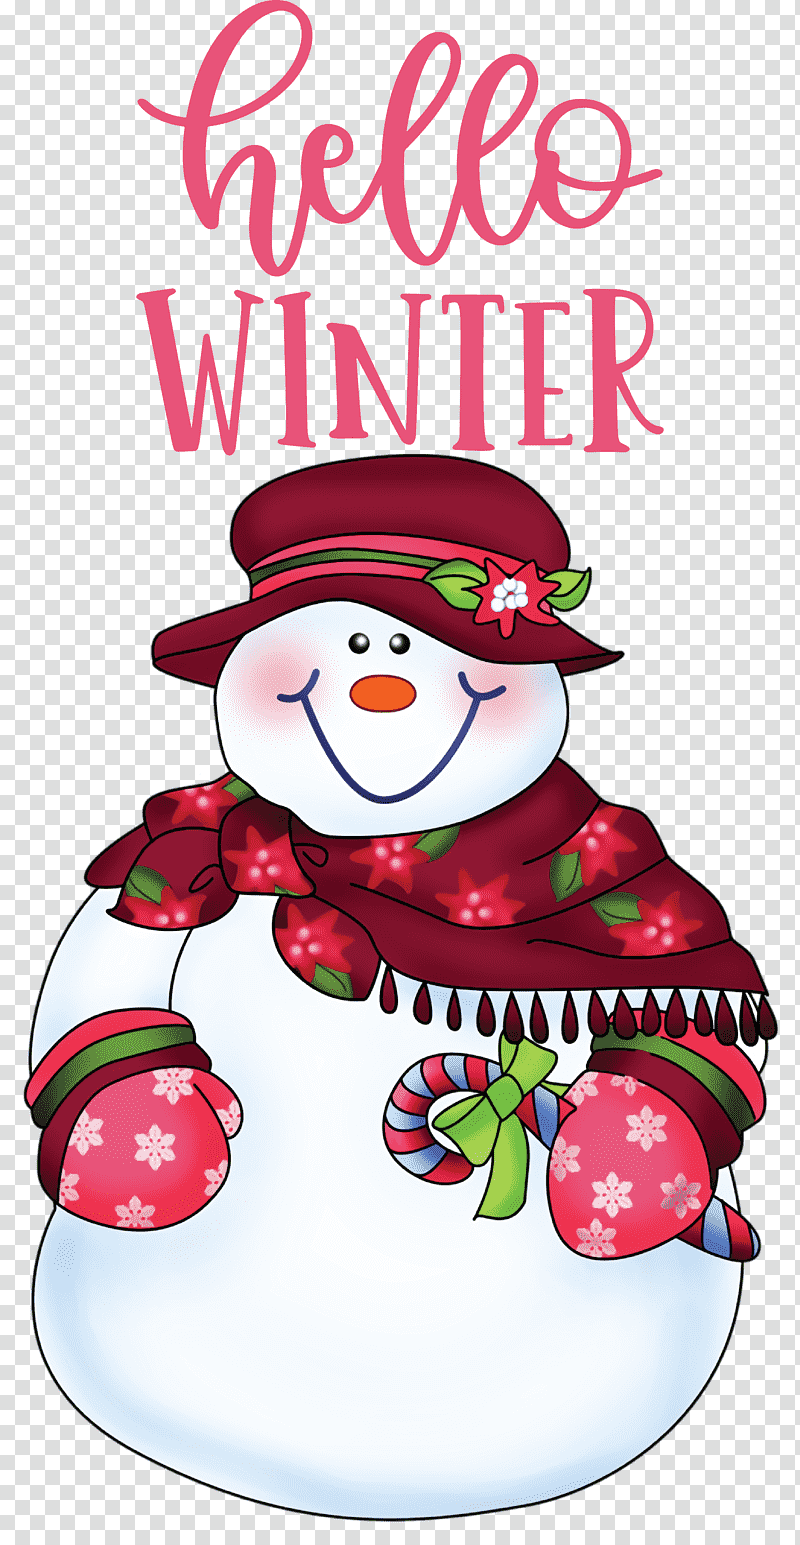 Hello Winter Winter, Winter
, Snowman, Christmas Day, Frosty The Snowman, Fan Art, Drawing transparent background PNG clipart